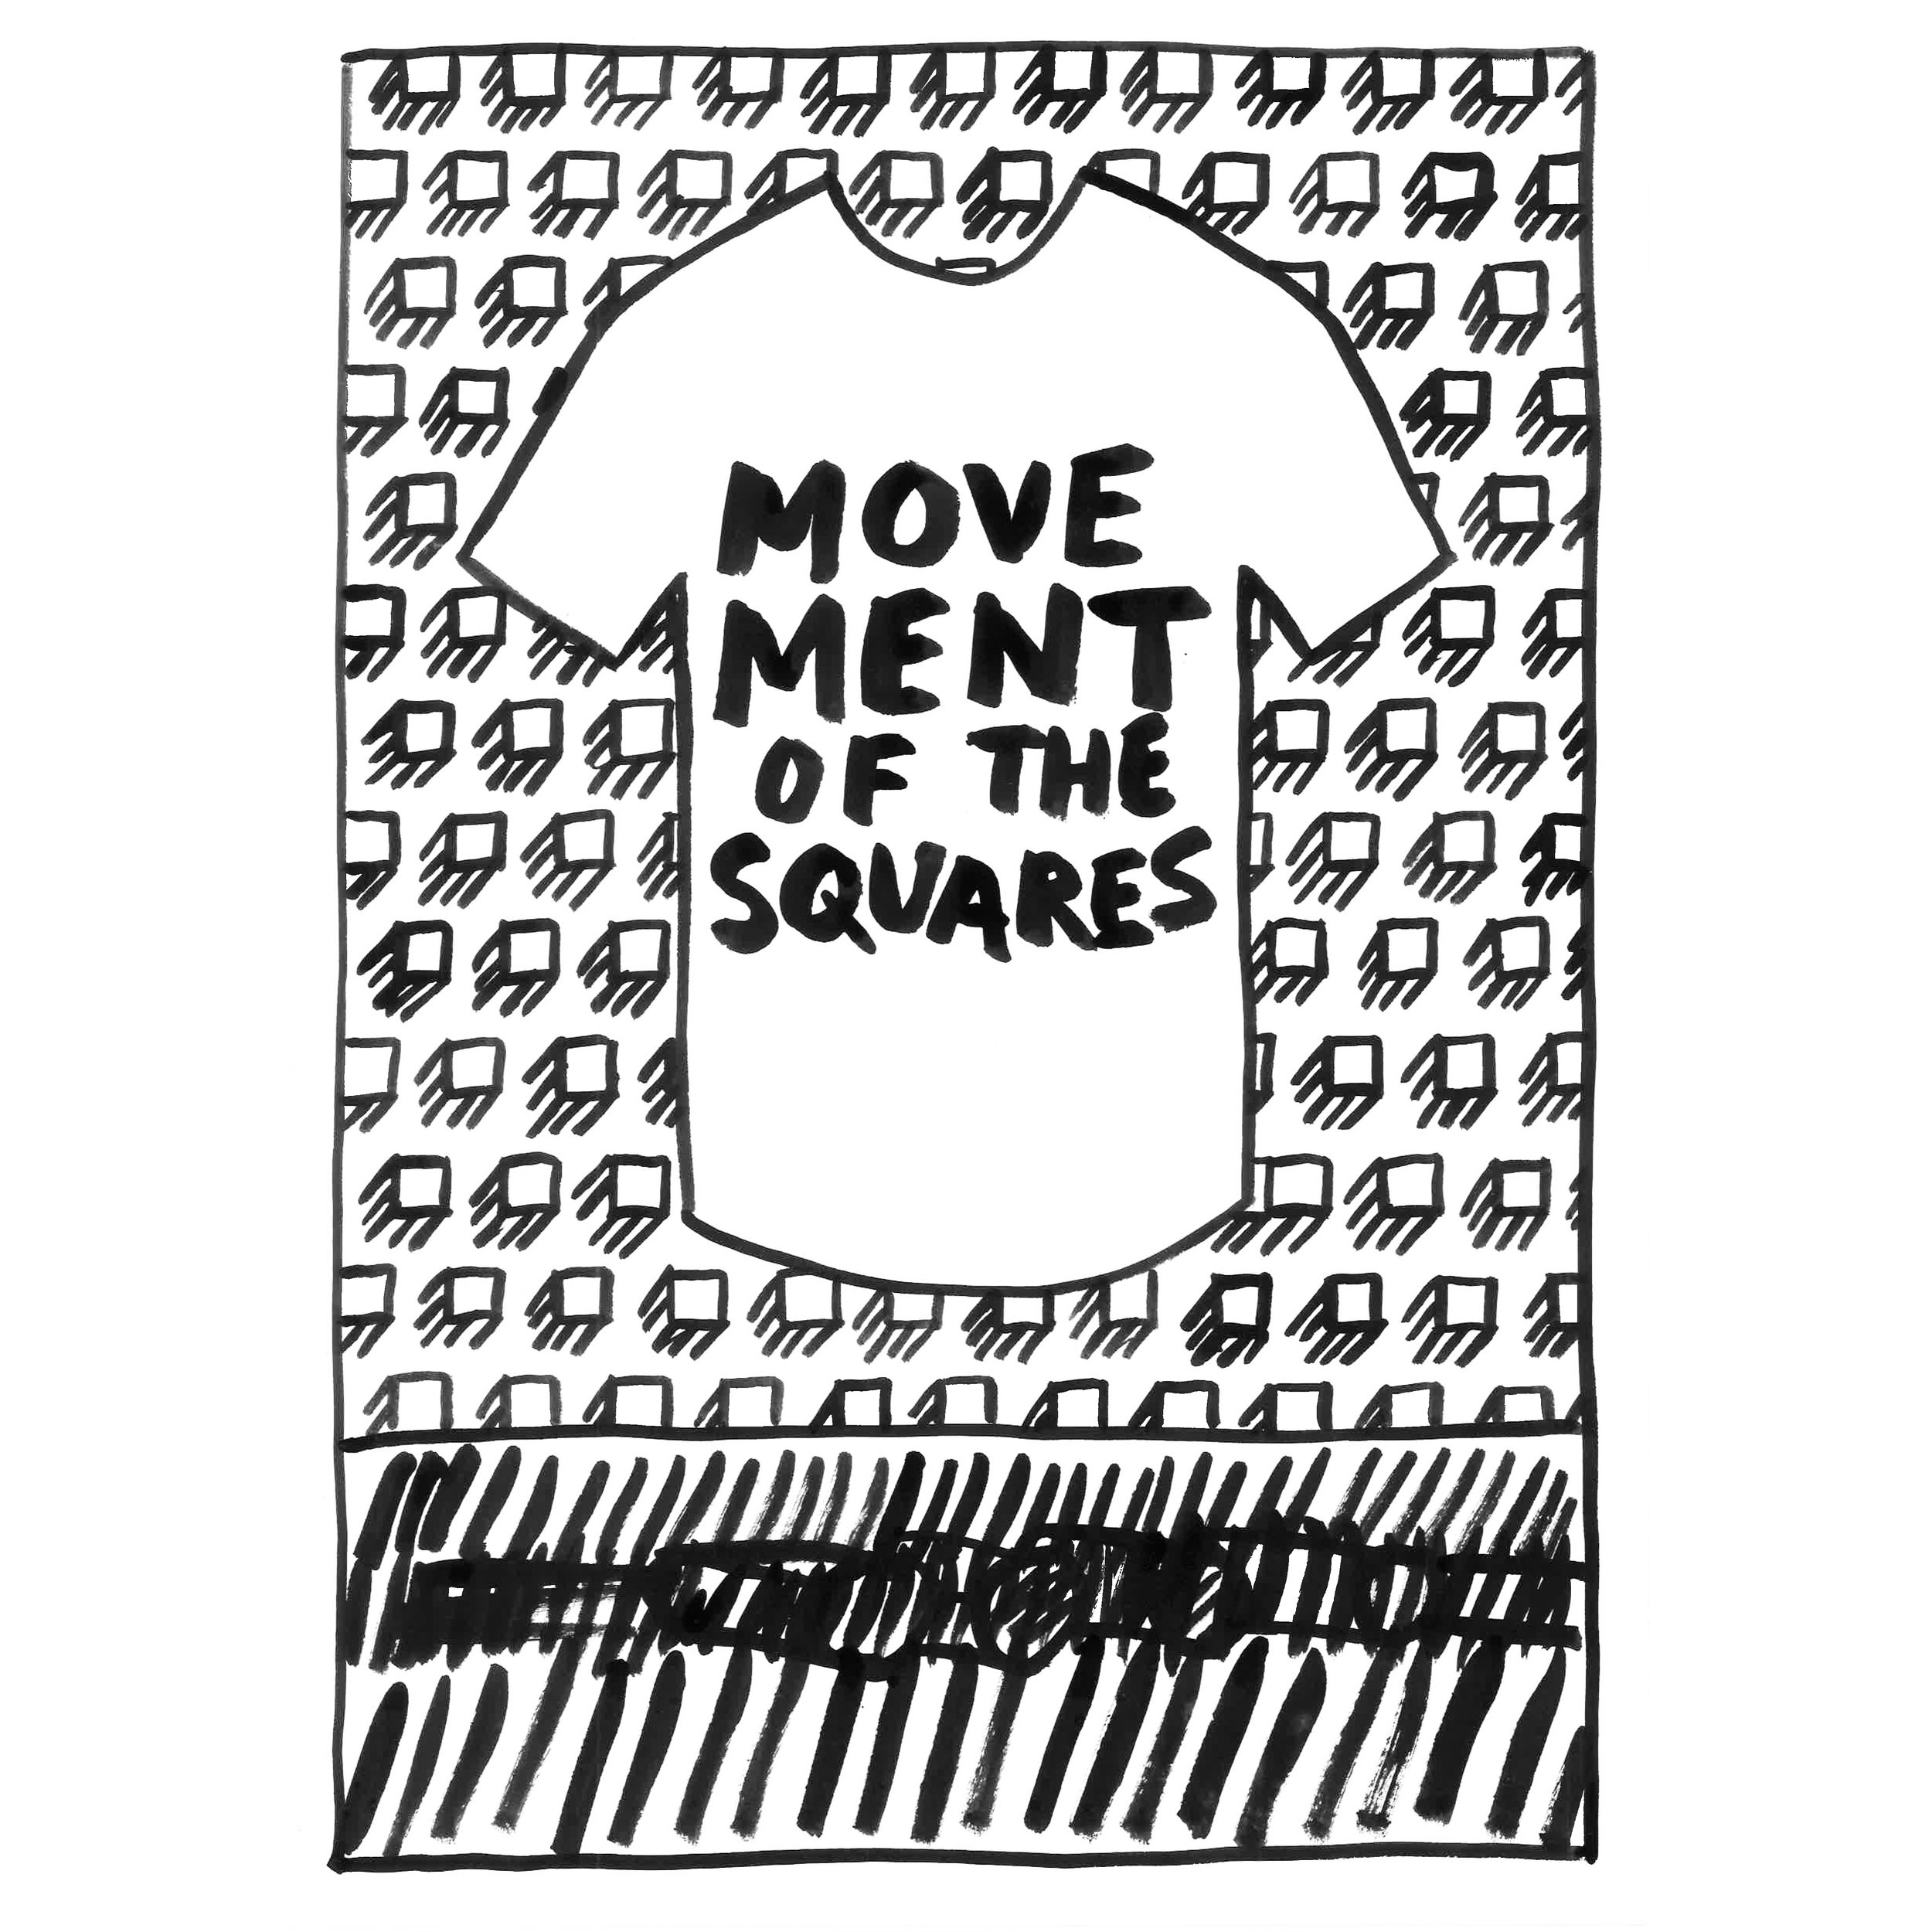 Movement of the Squares.jpg